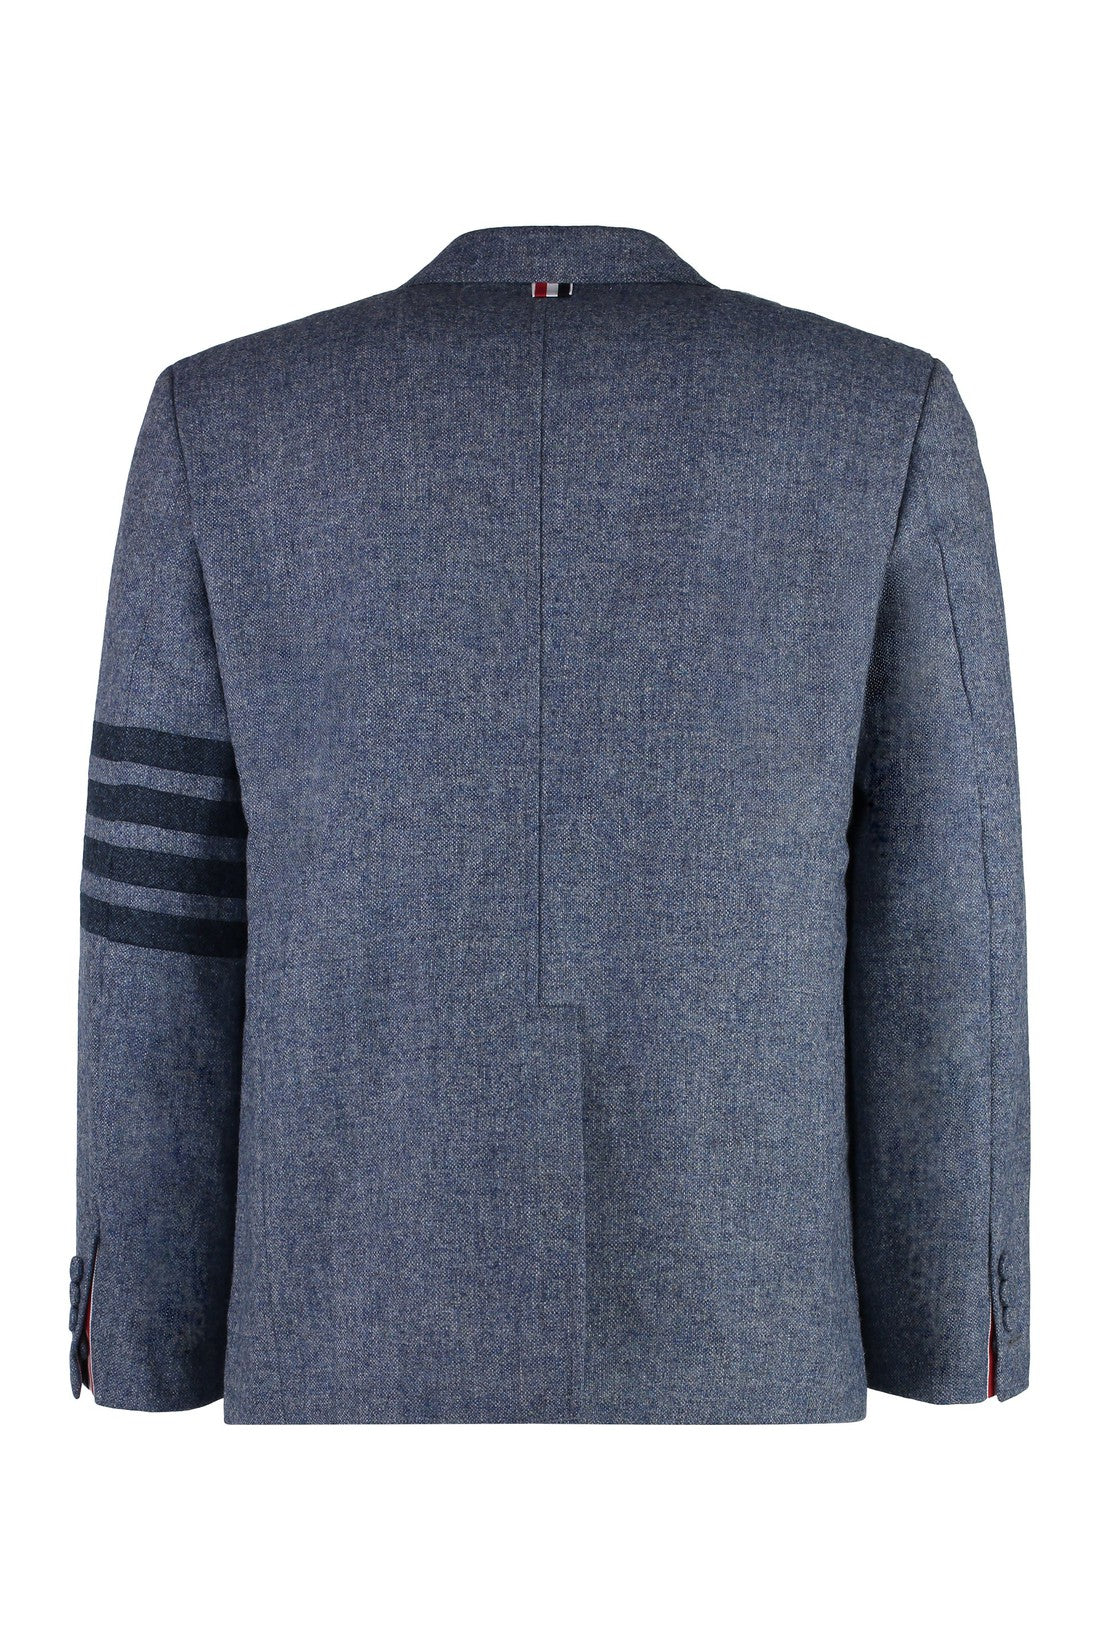 Thom Browne-OUTLET-SALE-Wool single-breasted blazer-ARCHIVIST